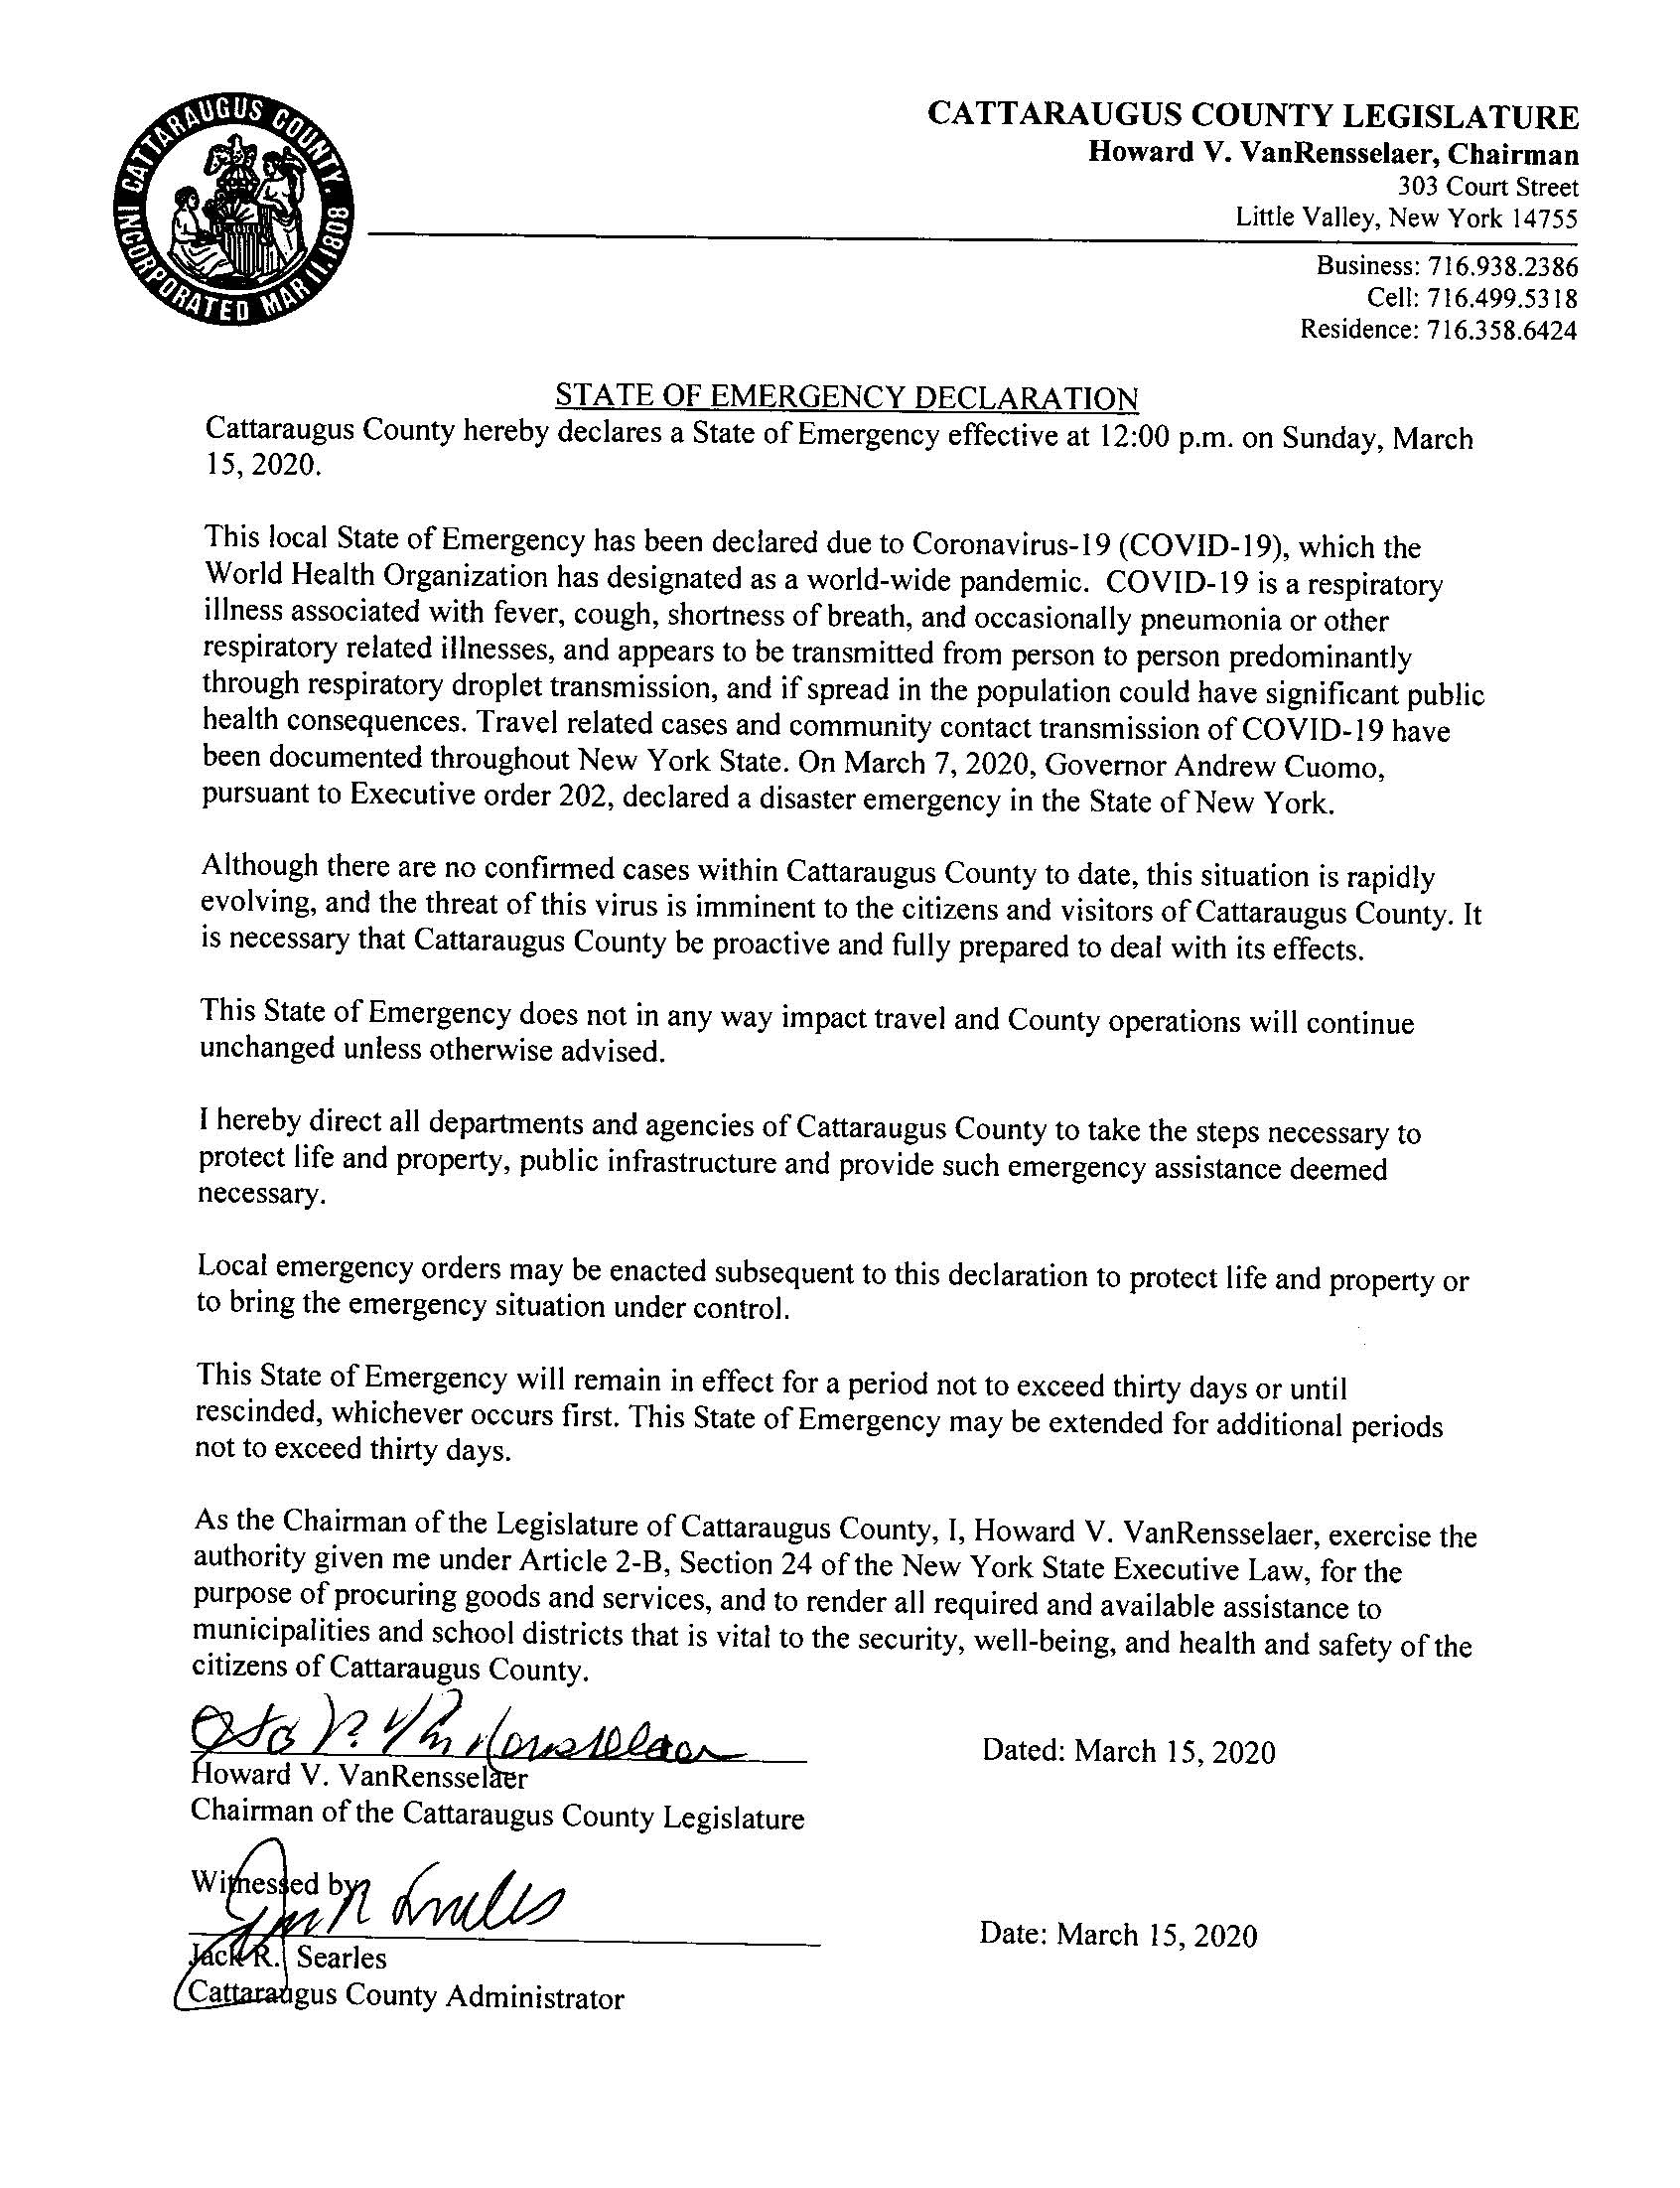 Declaration of a state of emergency in Cattaraugus County